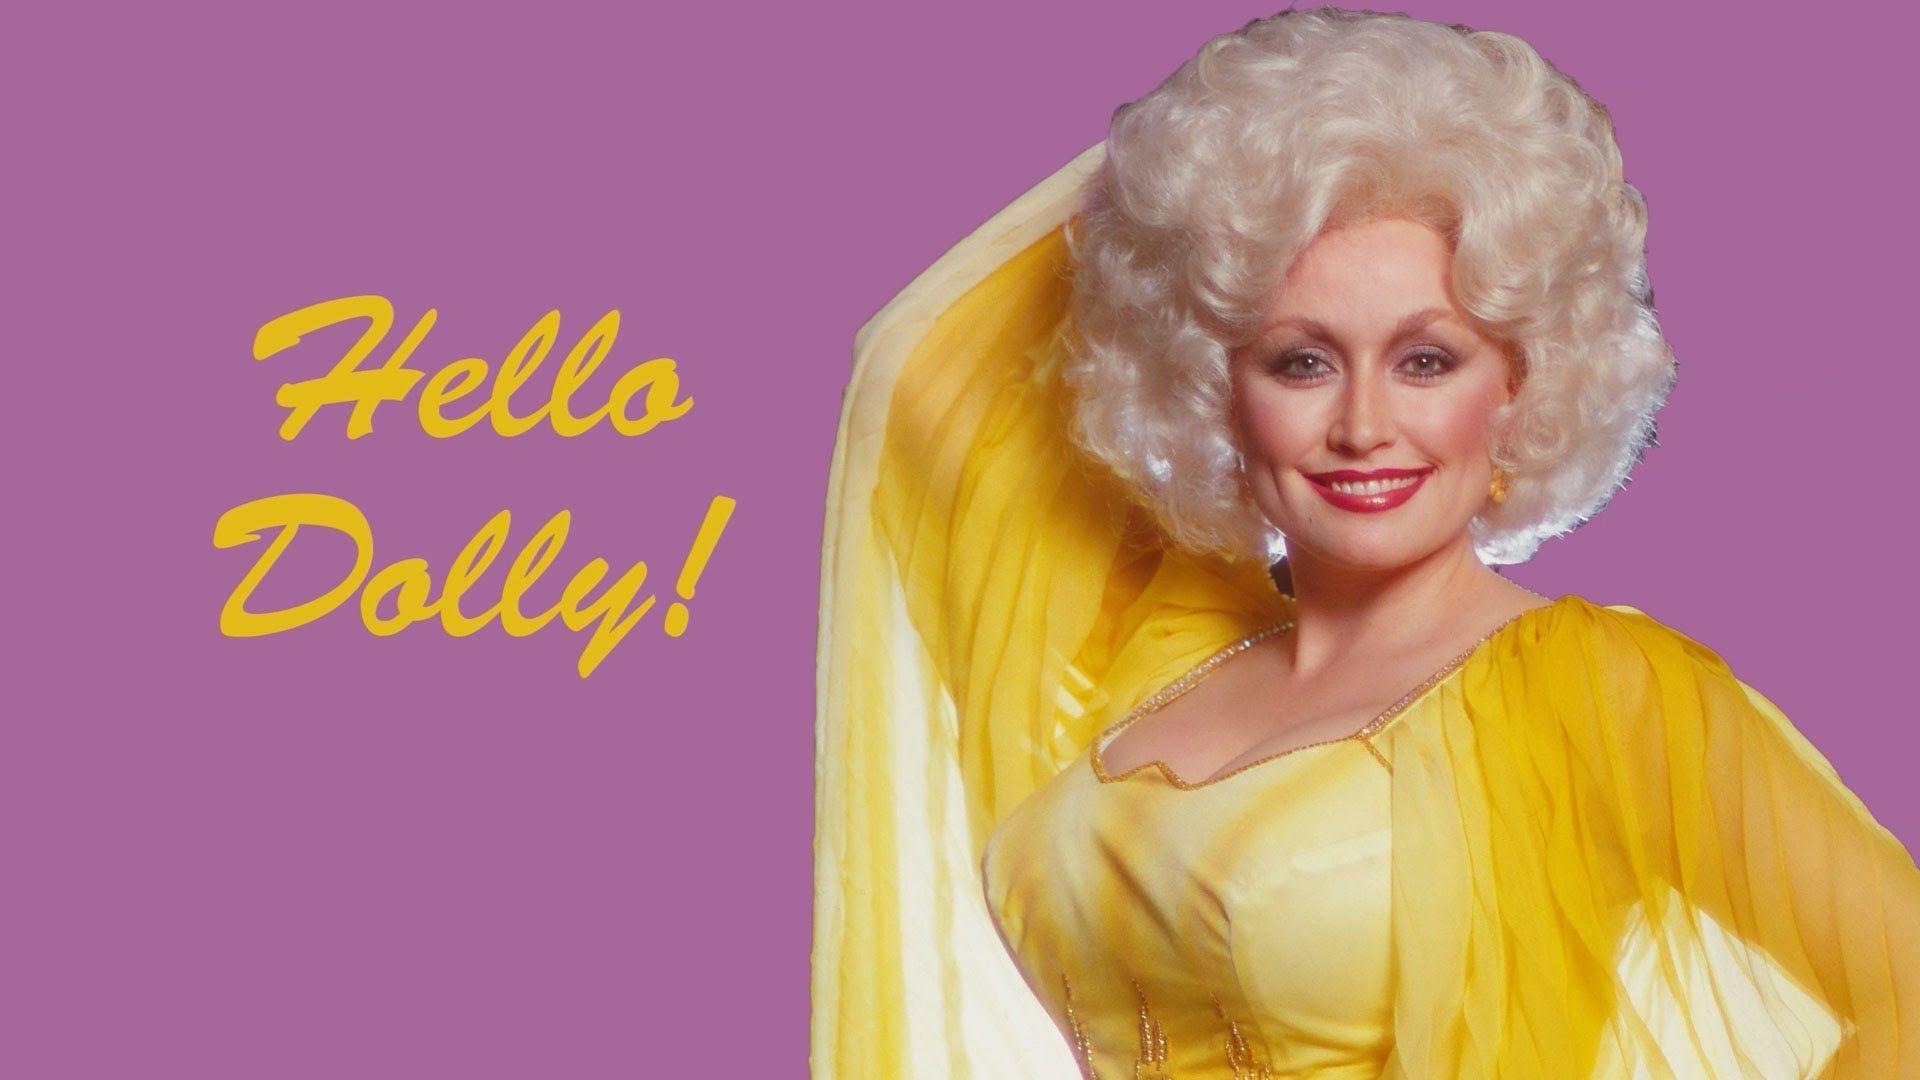 Things You May Not Know About Dolly Parton